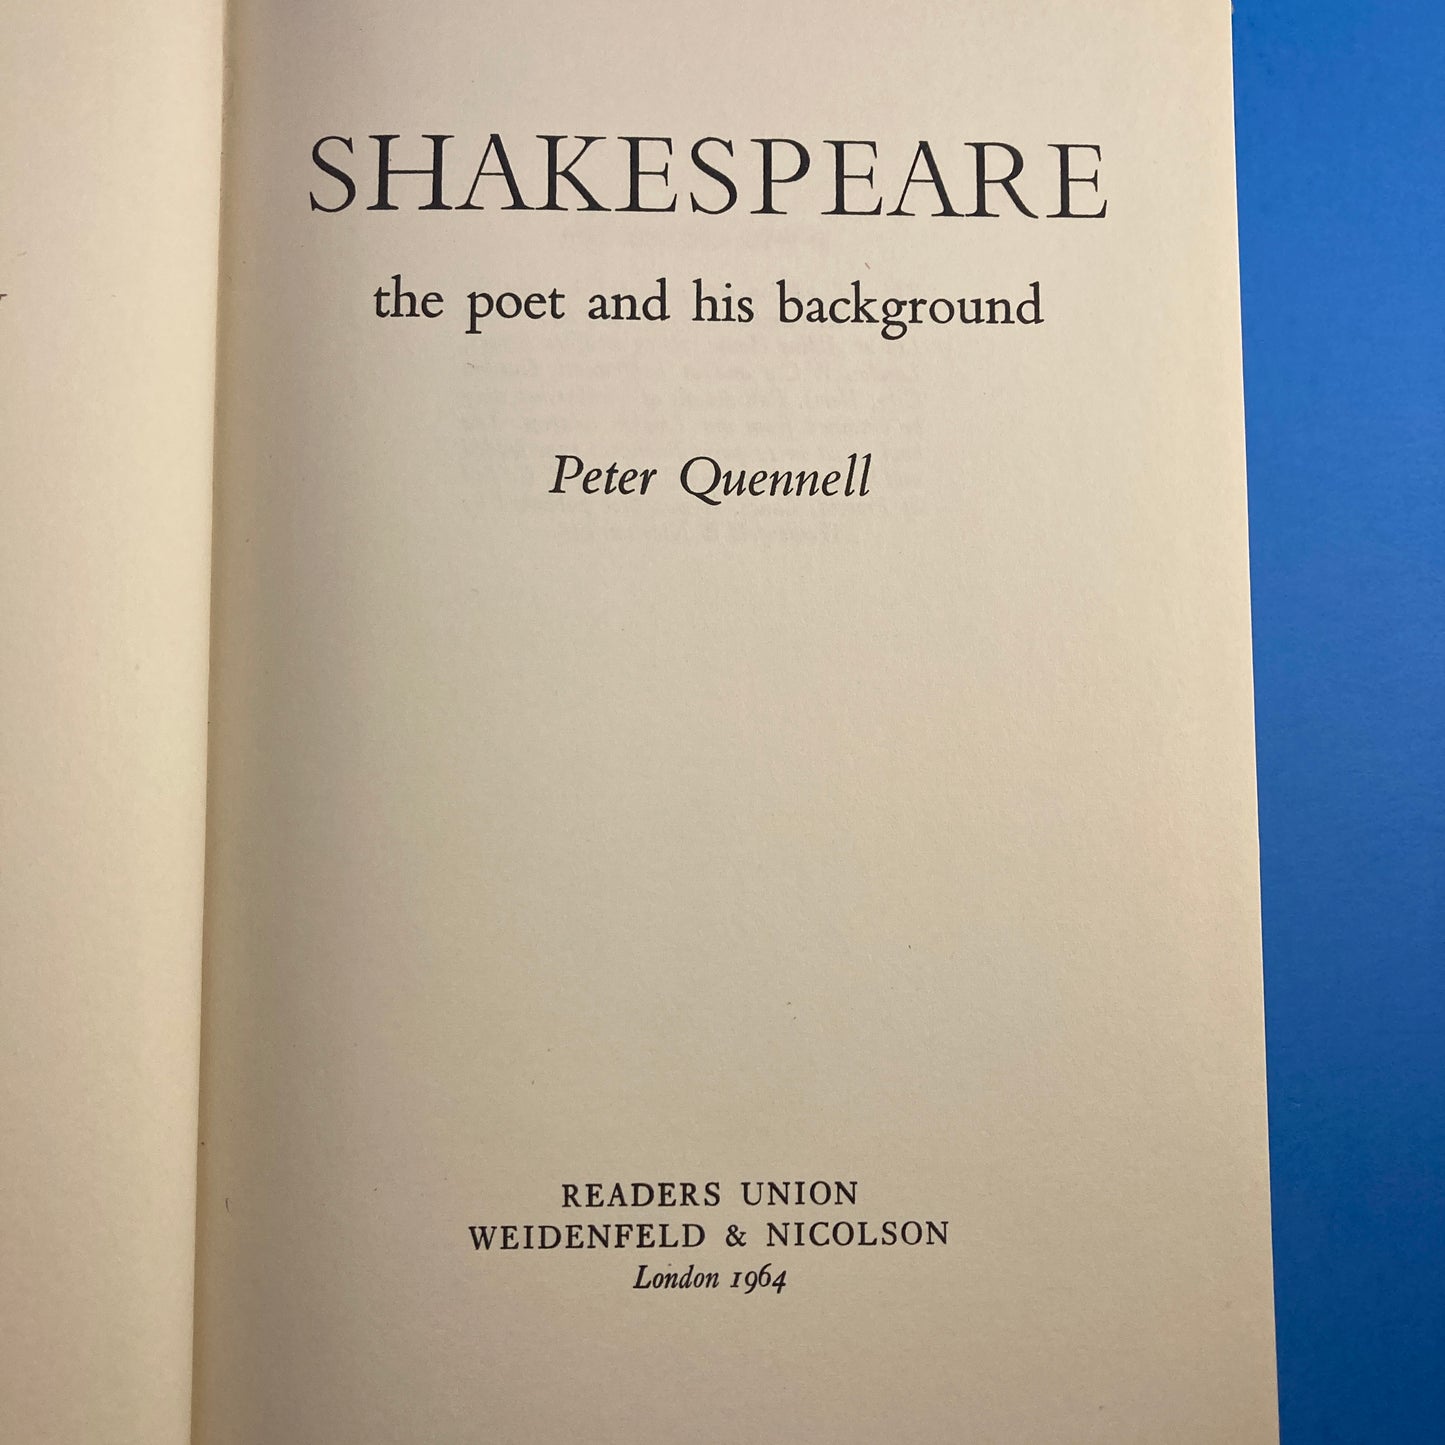 Shakespeare: The Poet and His Background